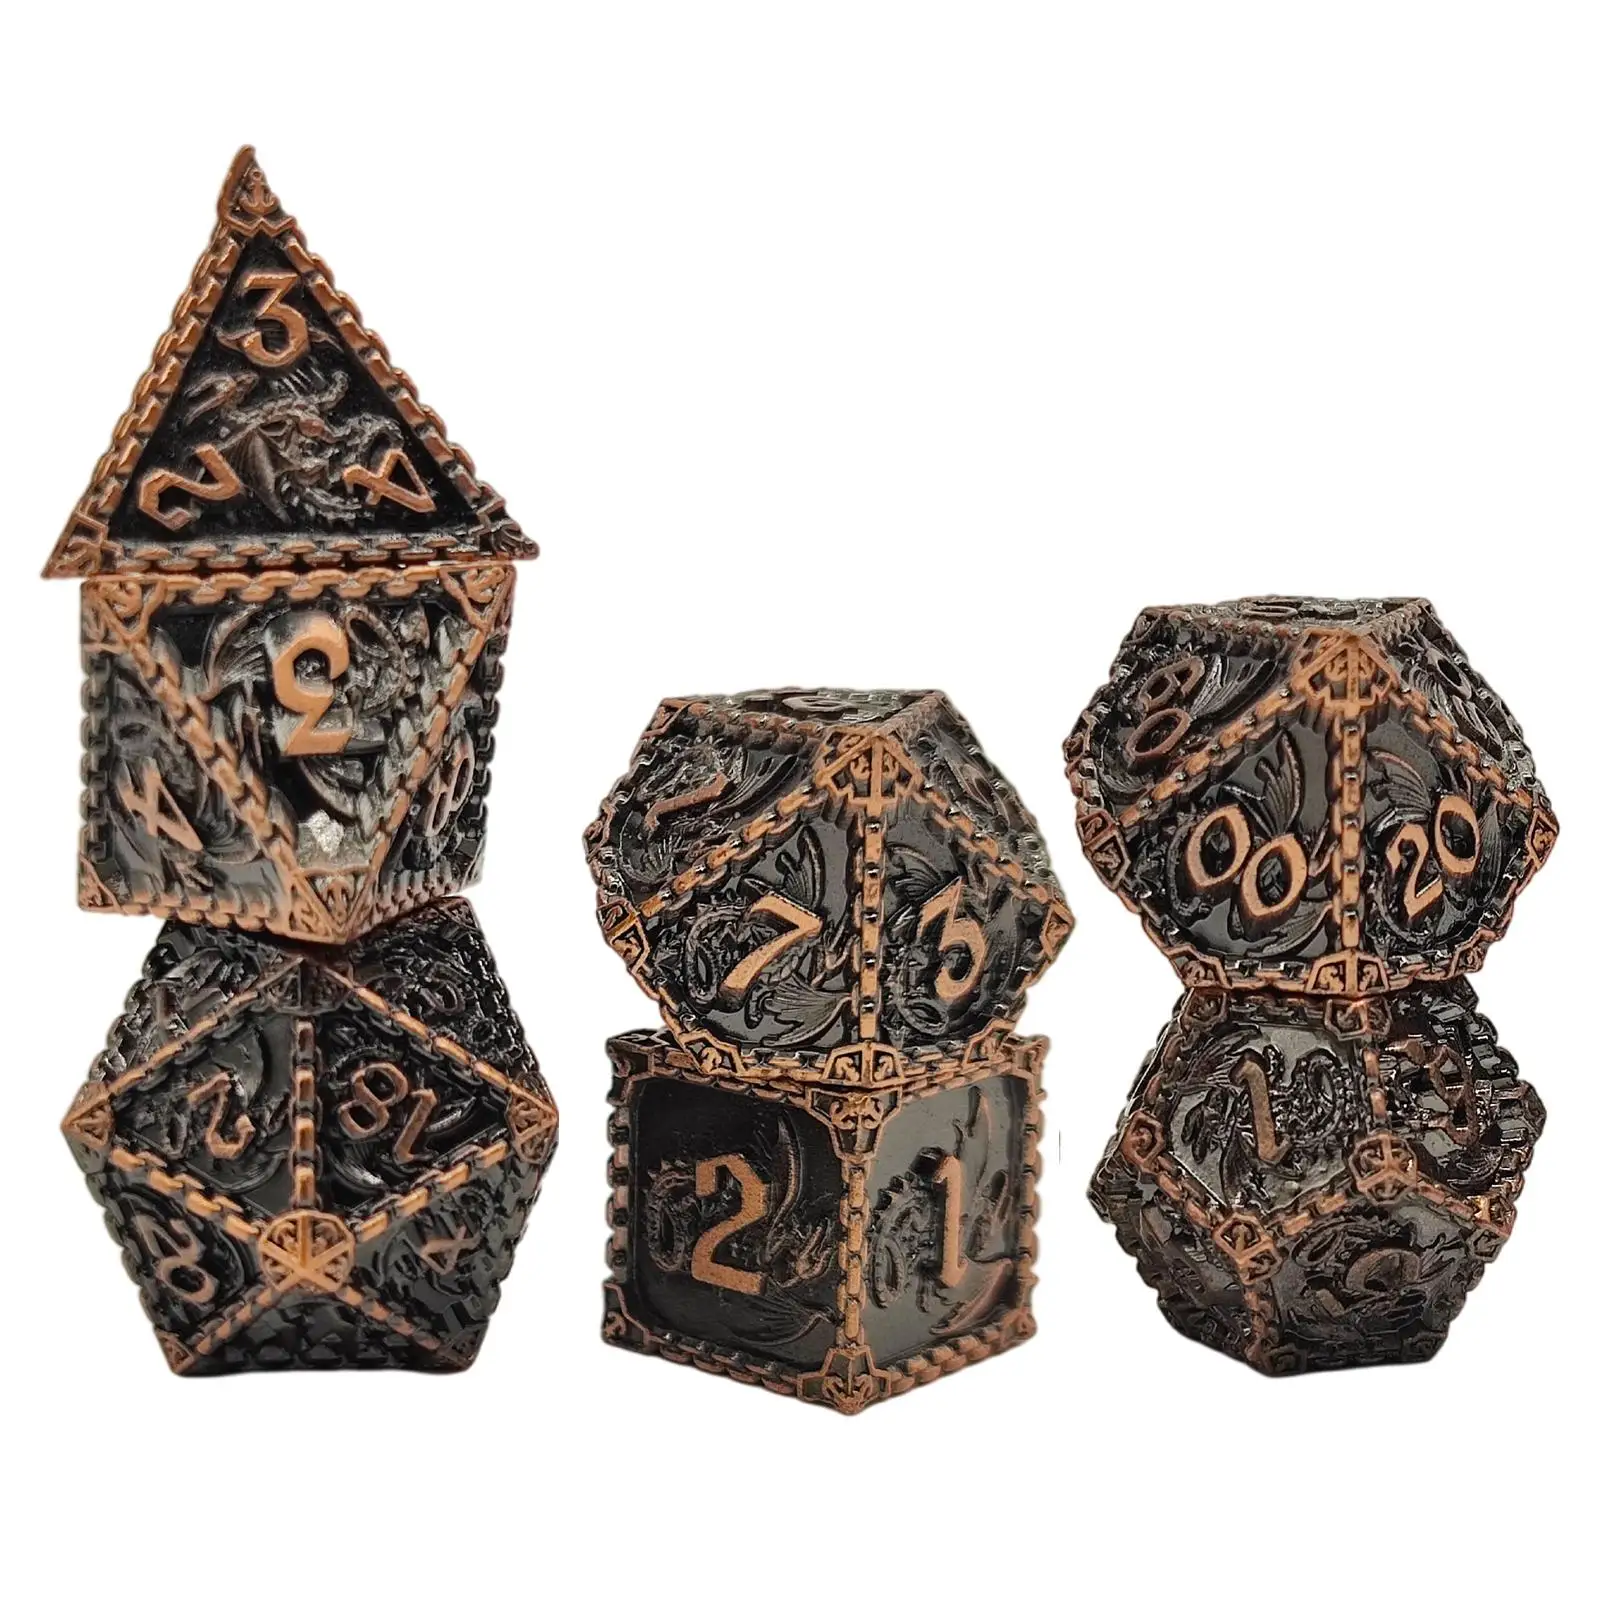 Polyhedral Dice Big Numbers Multi-Sided Dice Set Table Games Party Favors for DND